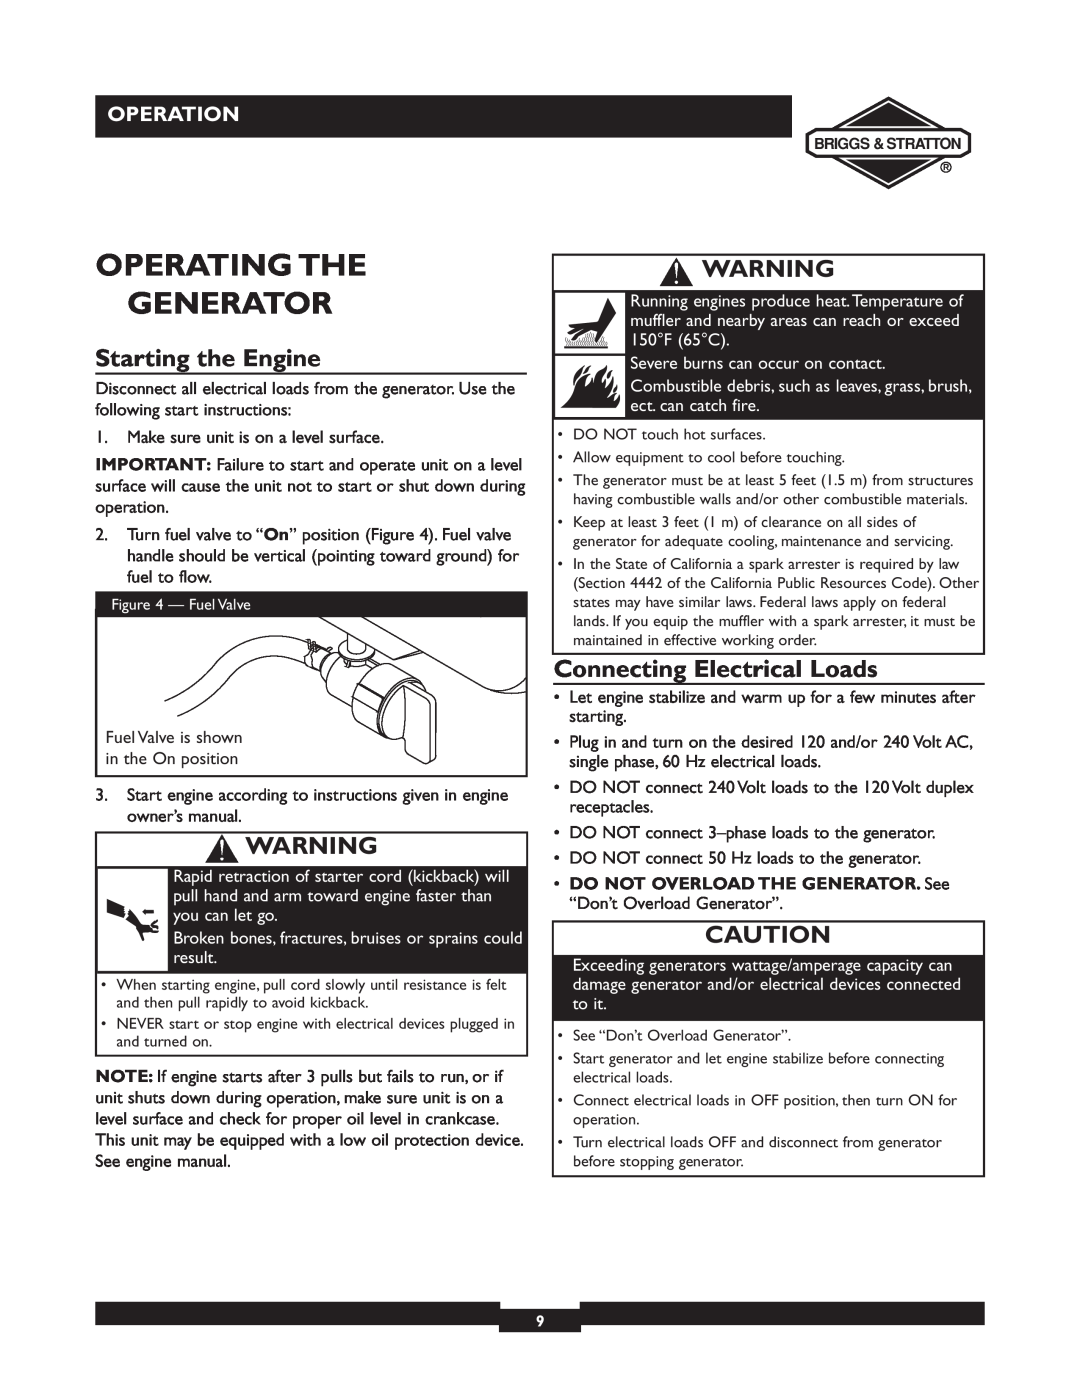 Briggs & Stratton 30238 owner manual Operating The Generator, Starting the Engine, Connecting Electrical Loads, Operation 